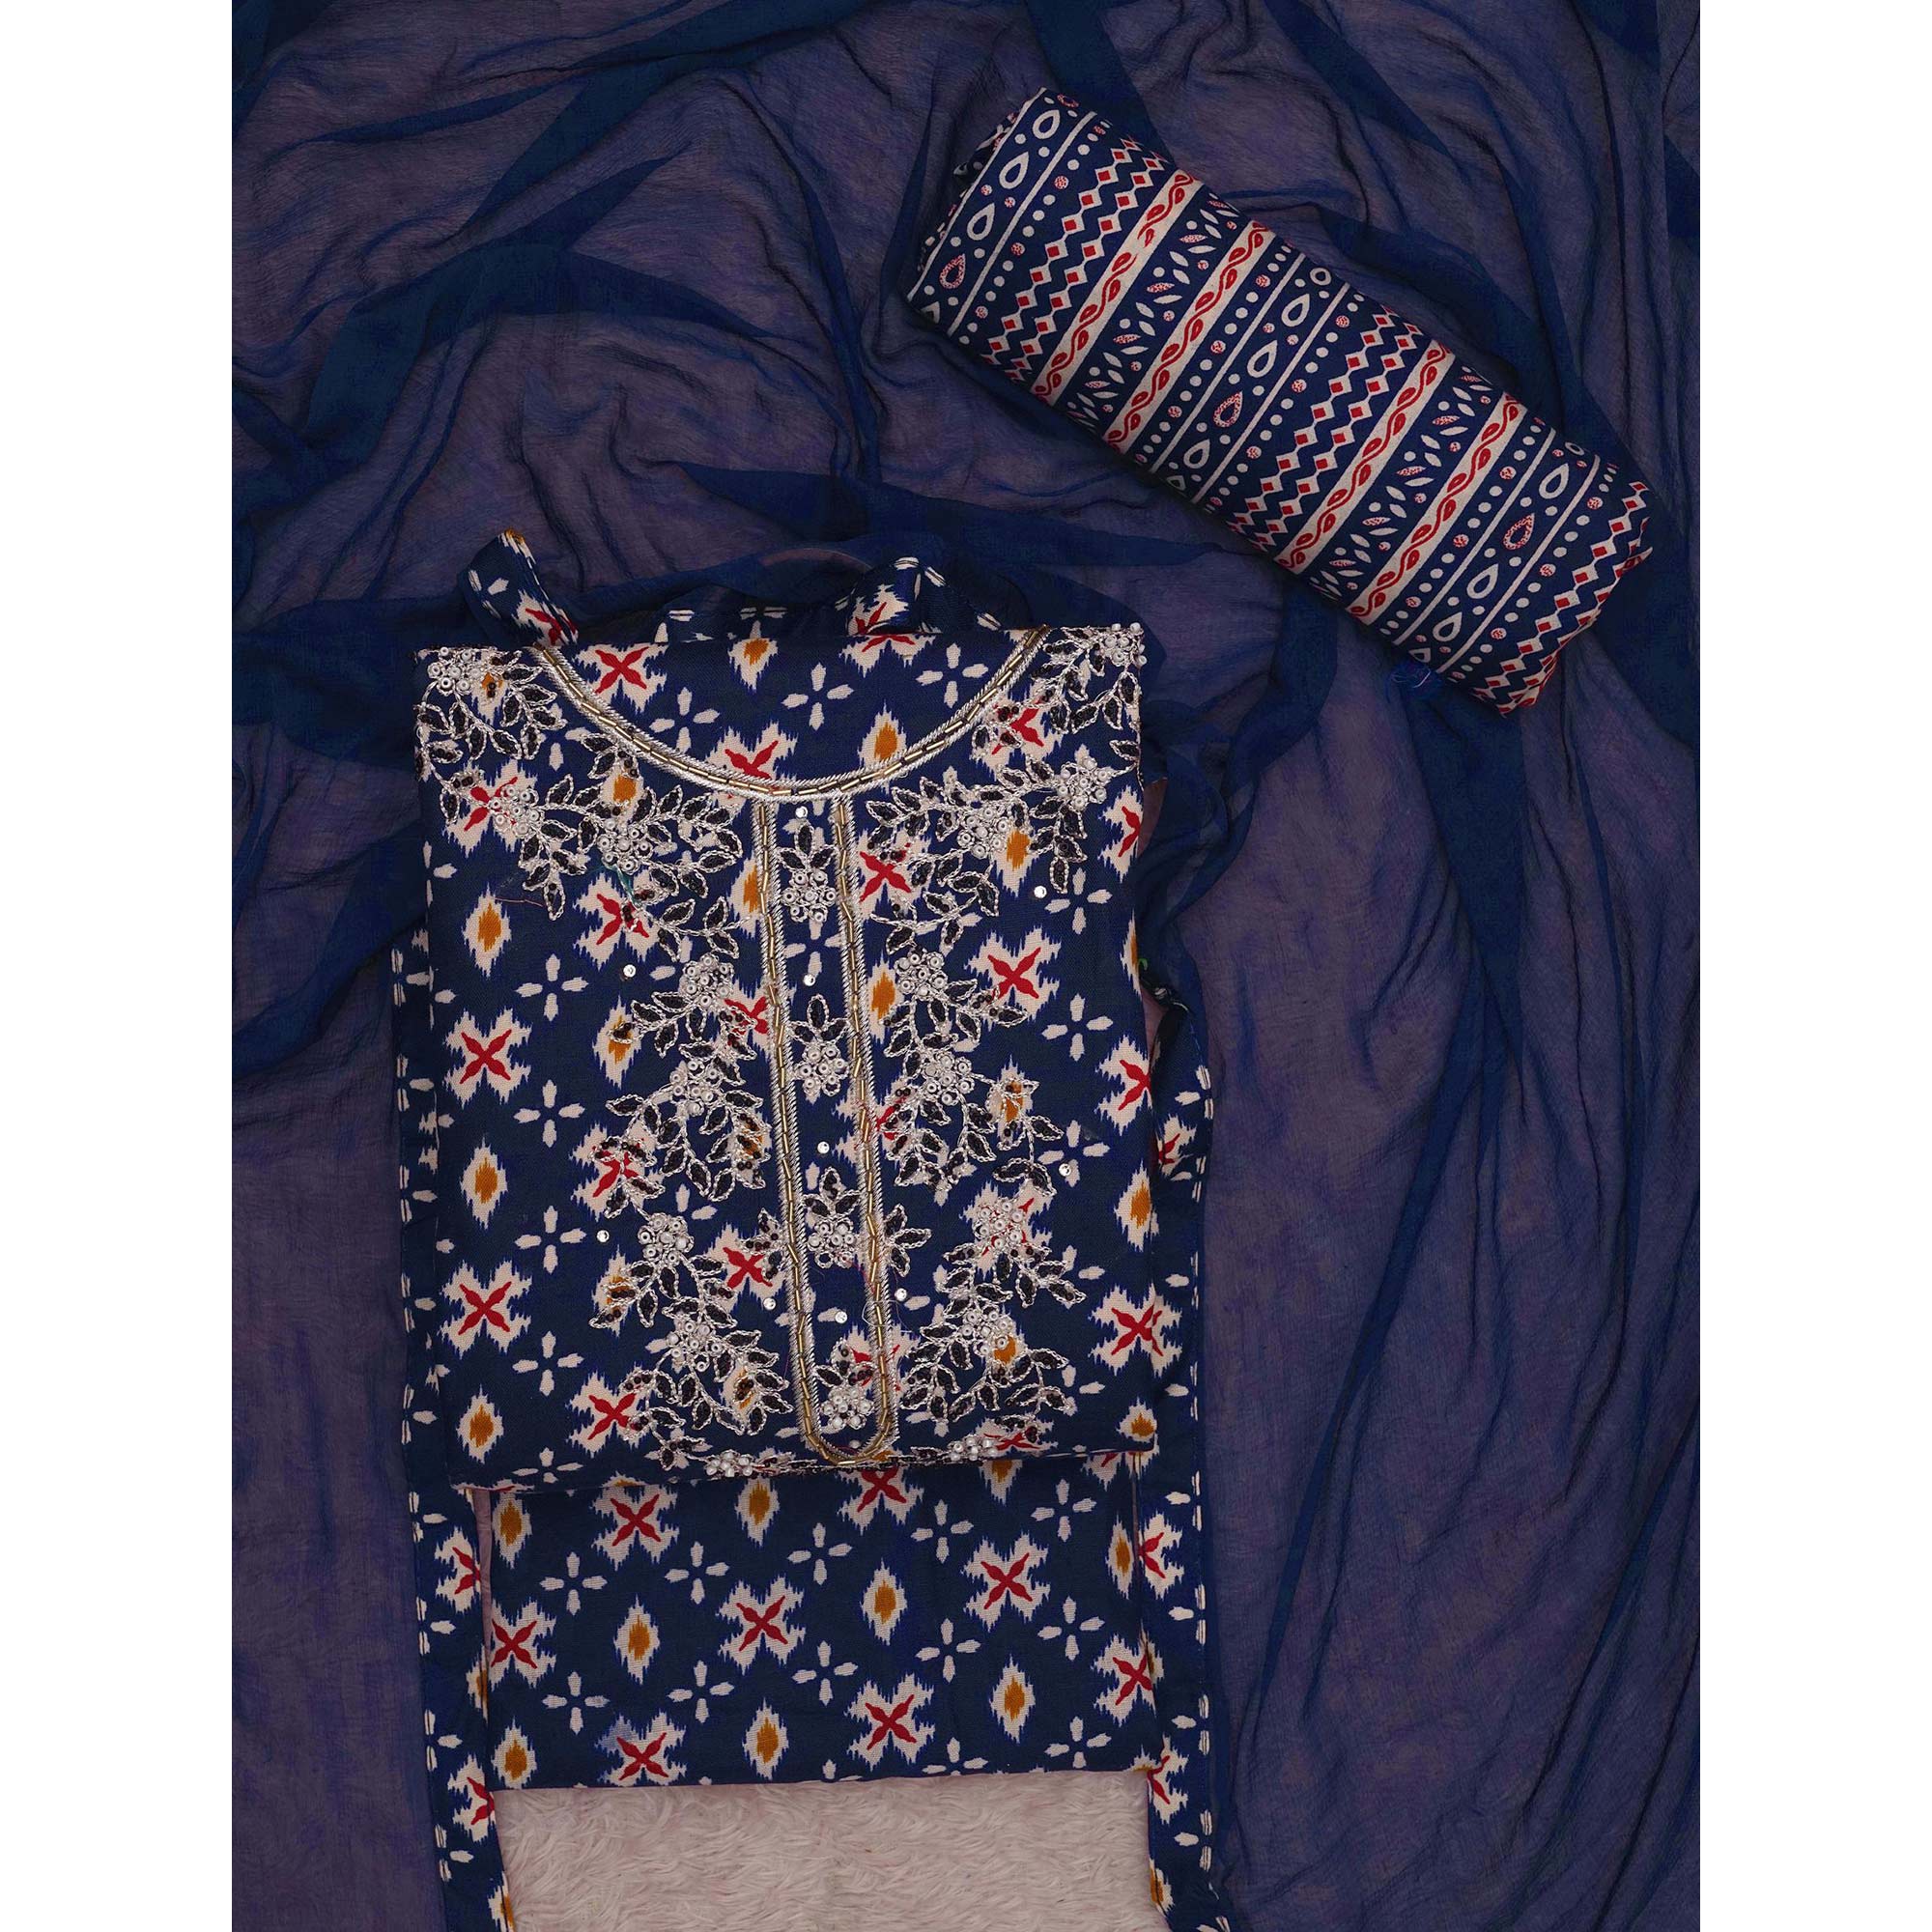 Blue Printed With Embroidered Cotton Blend Dress Material